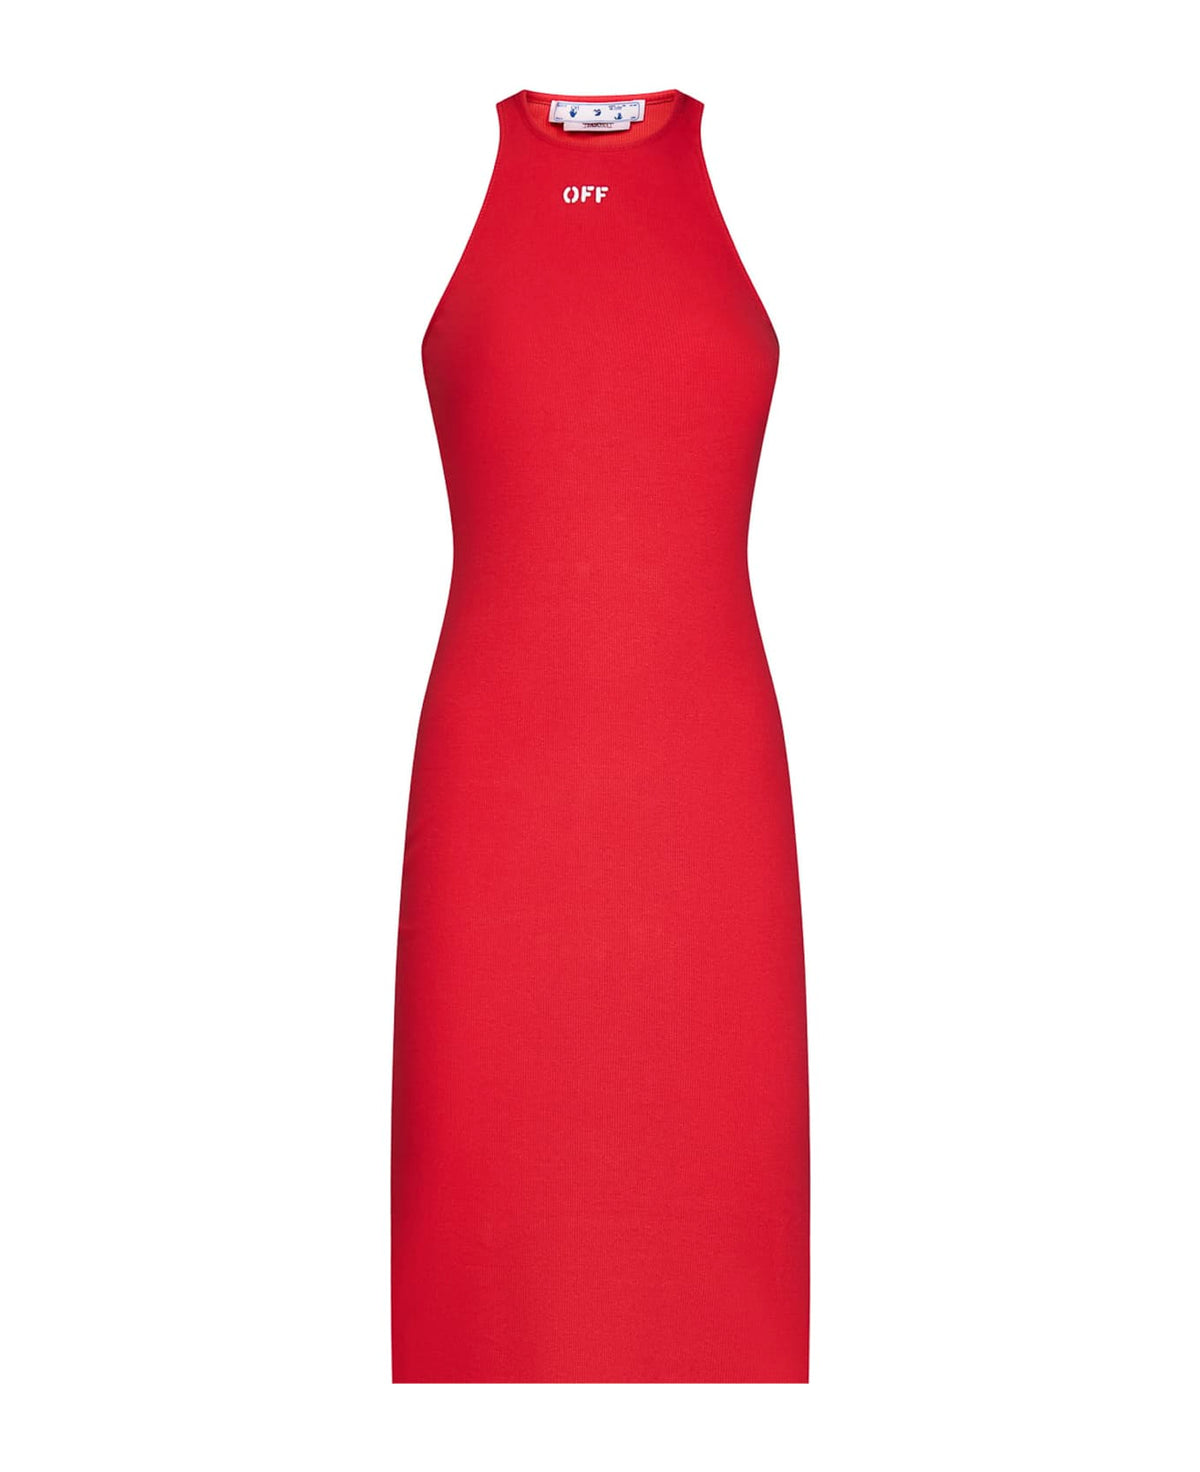 Off Stamp Ribbed Rowing Midi Dress